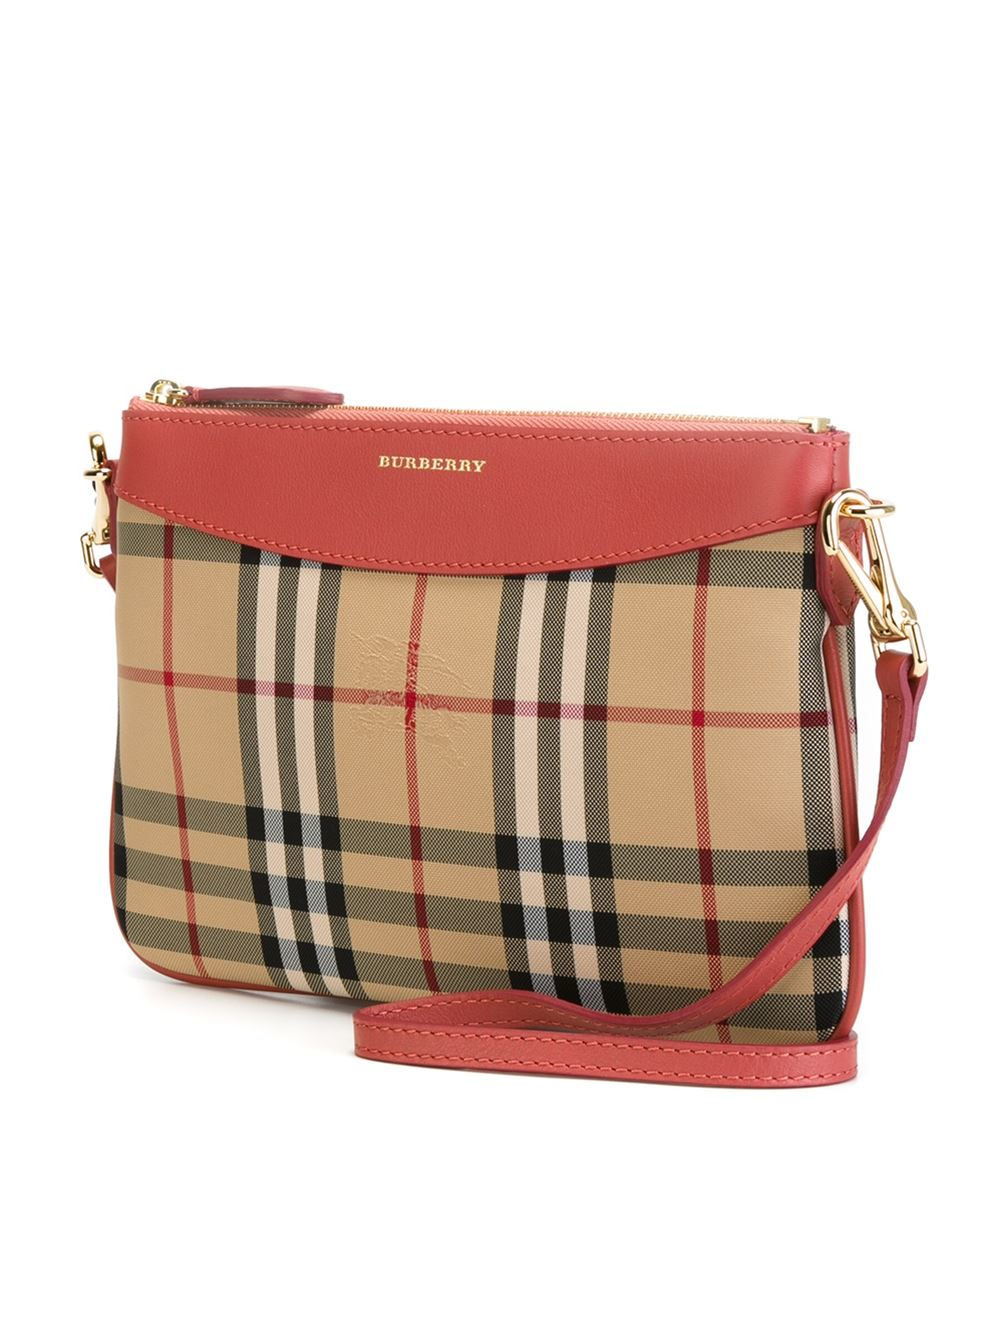 Burberry Horseferry Check Crossbody Bag in Beige (NUDE & NEUTRALS) | Lyst